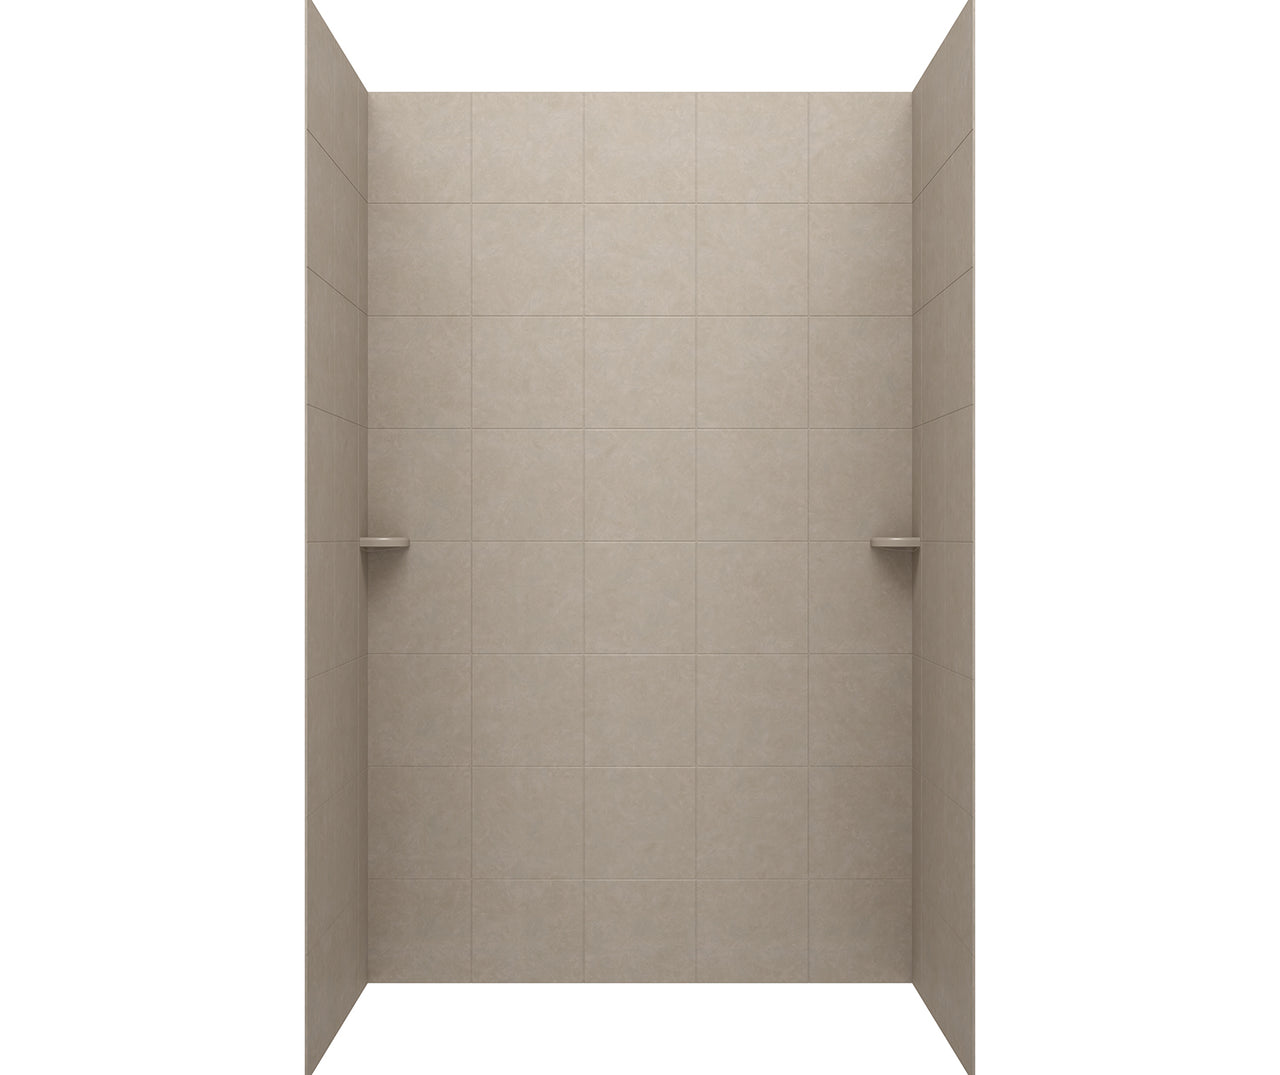 SQMK96-3662 36 x 62 x 96 Swanstone Square Tile Glue up Shower Wall Kit in Limestone